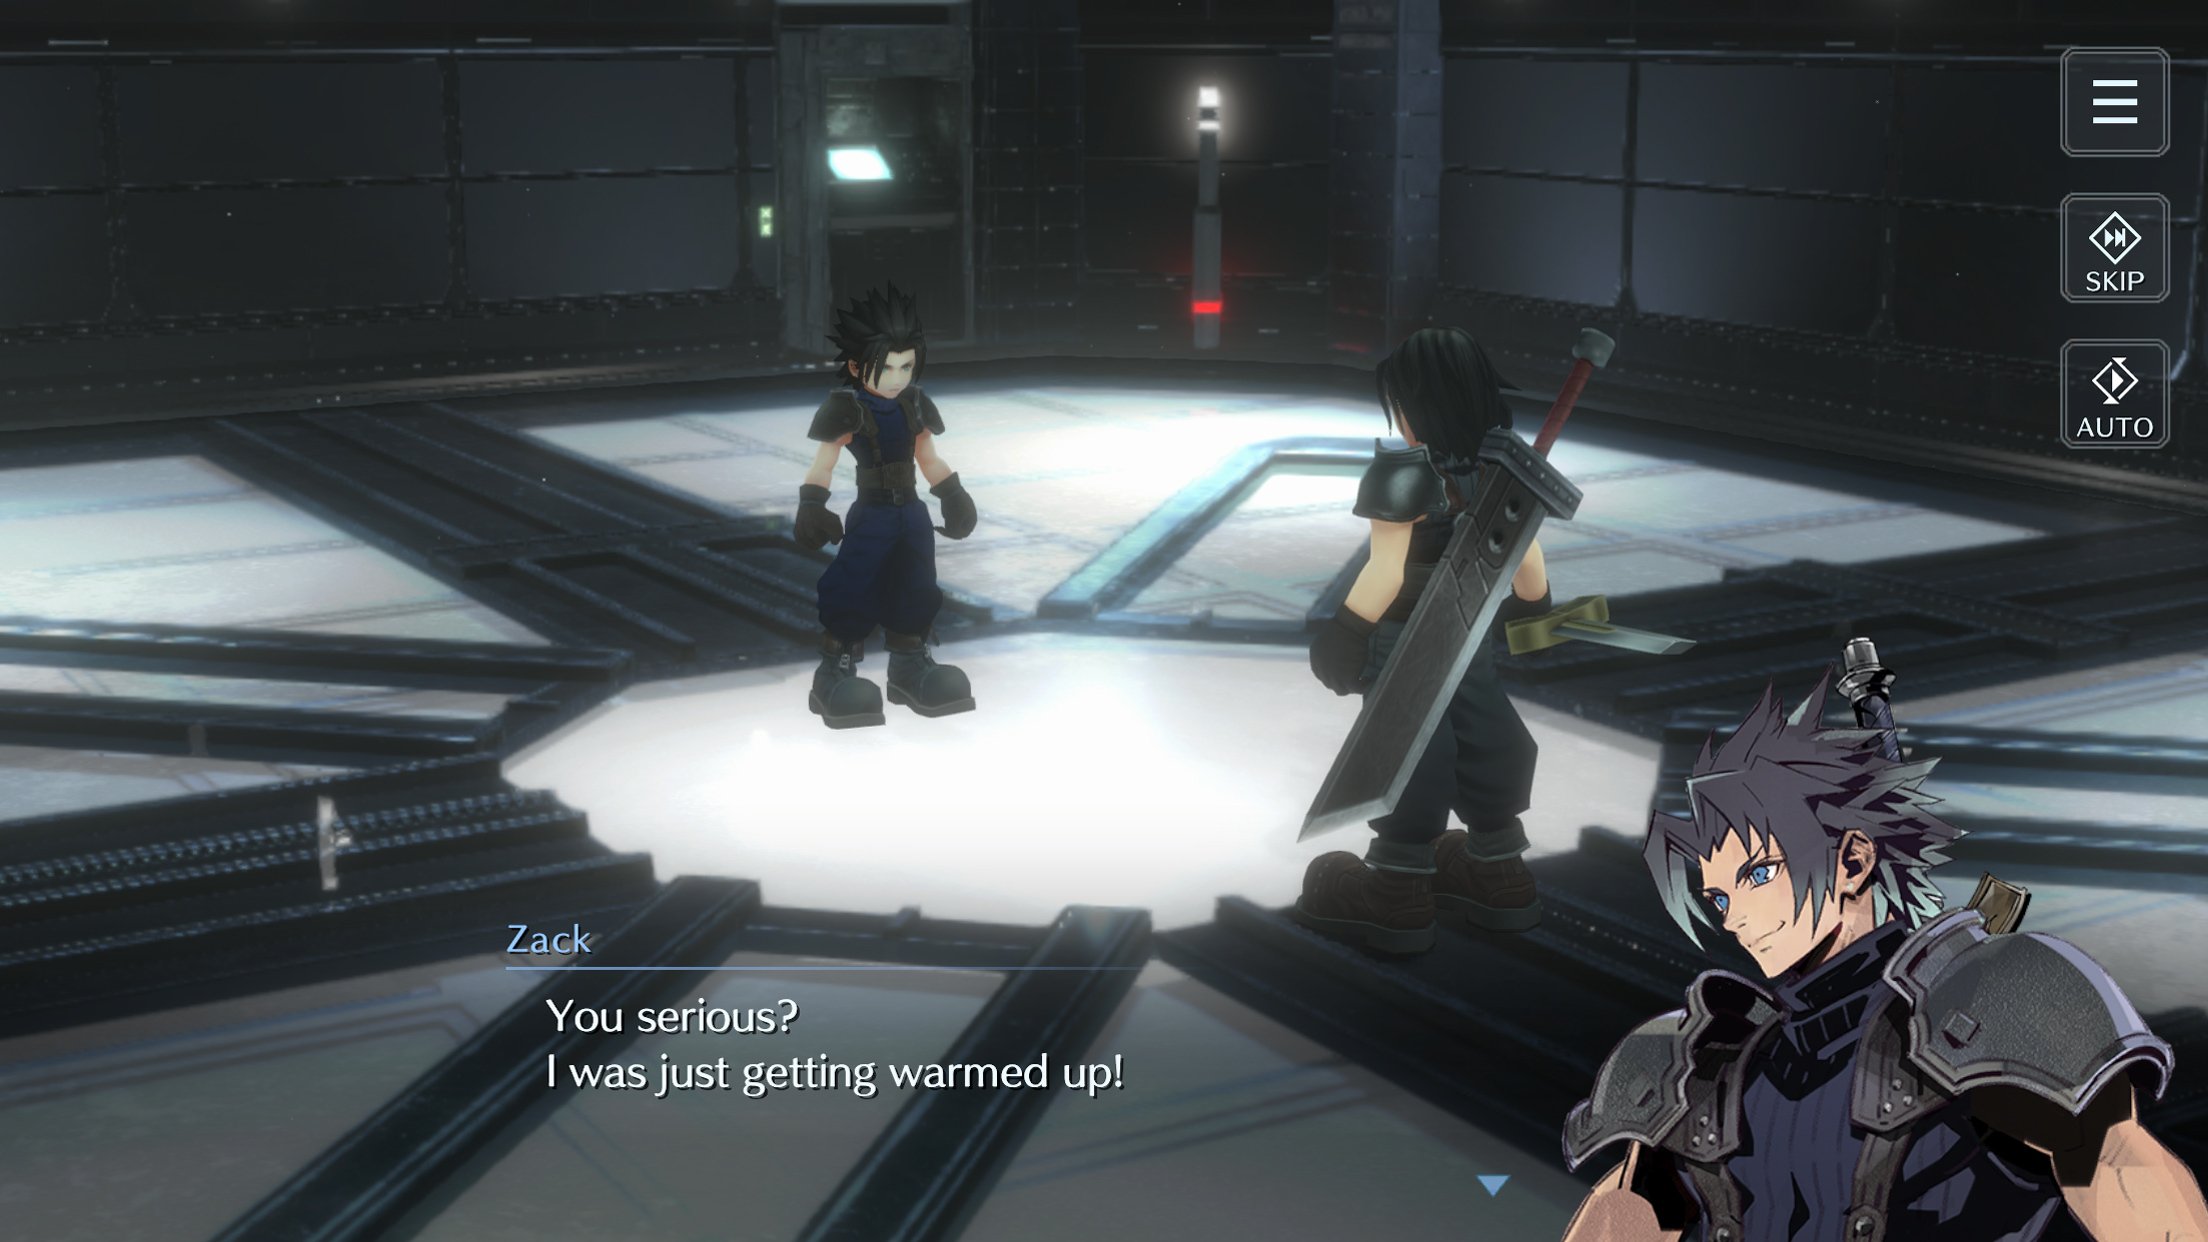 All the details about Final Fantasy VII: Ever Crisis: release date, beta,  free-to-play and more